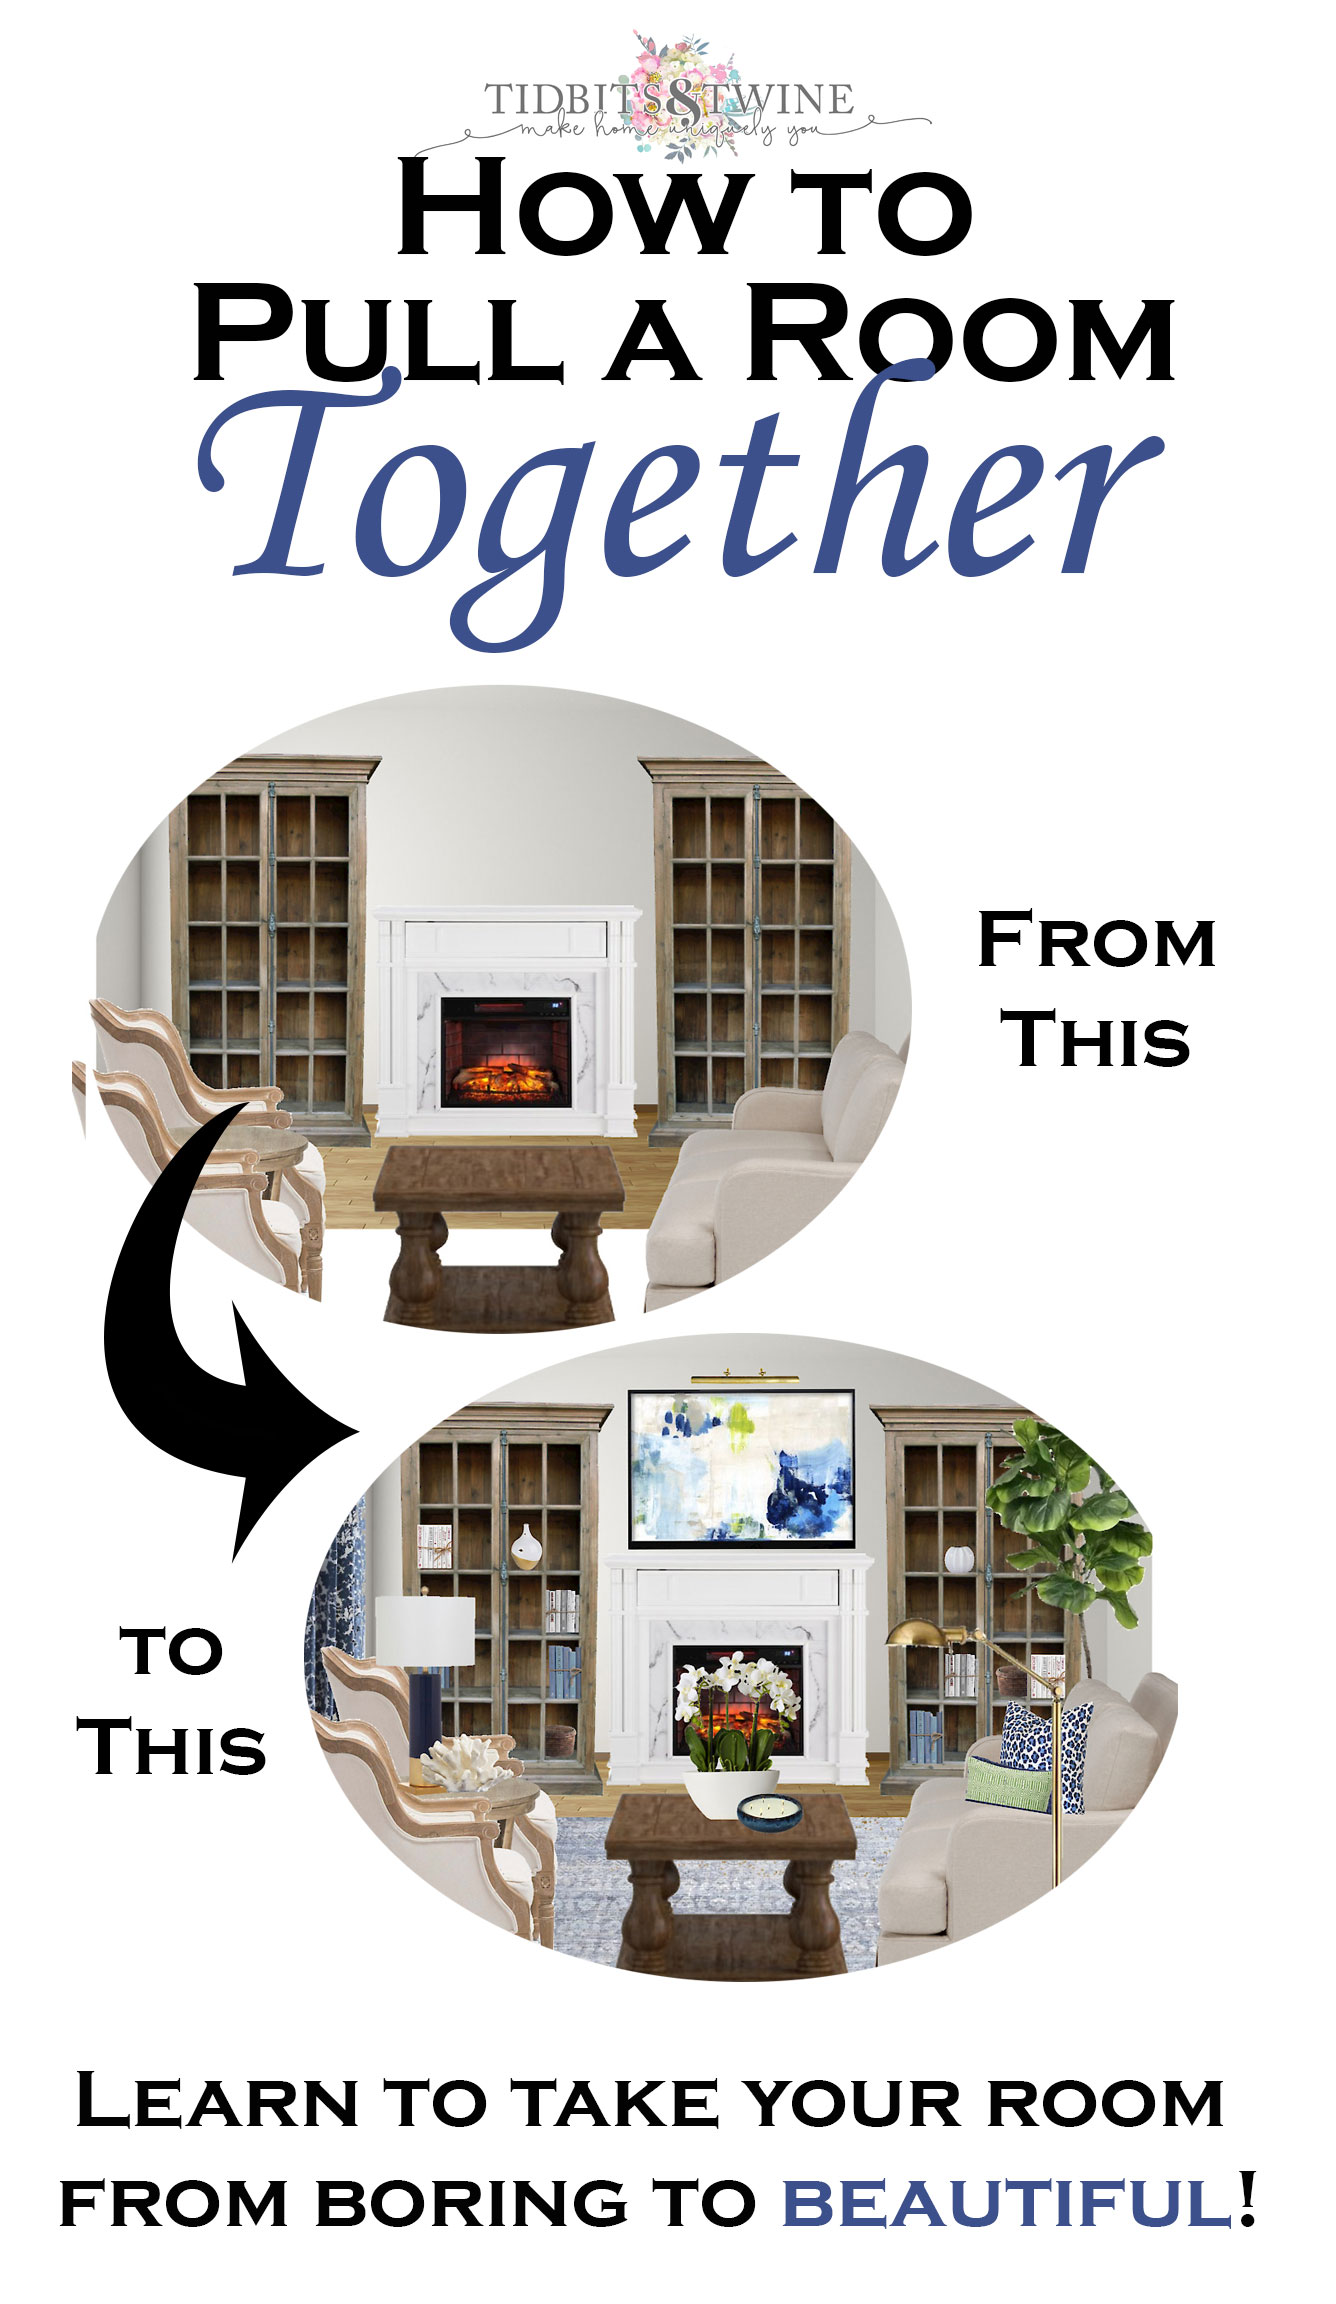 How to Pull a Room Together